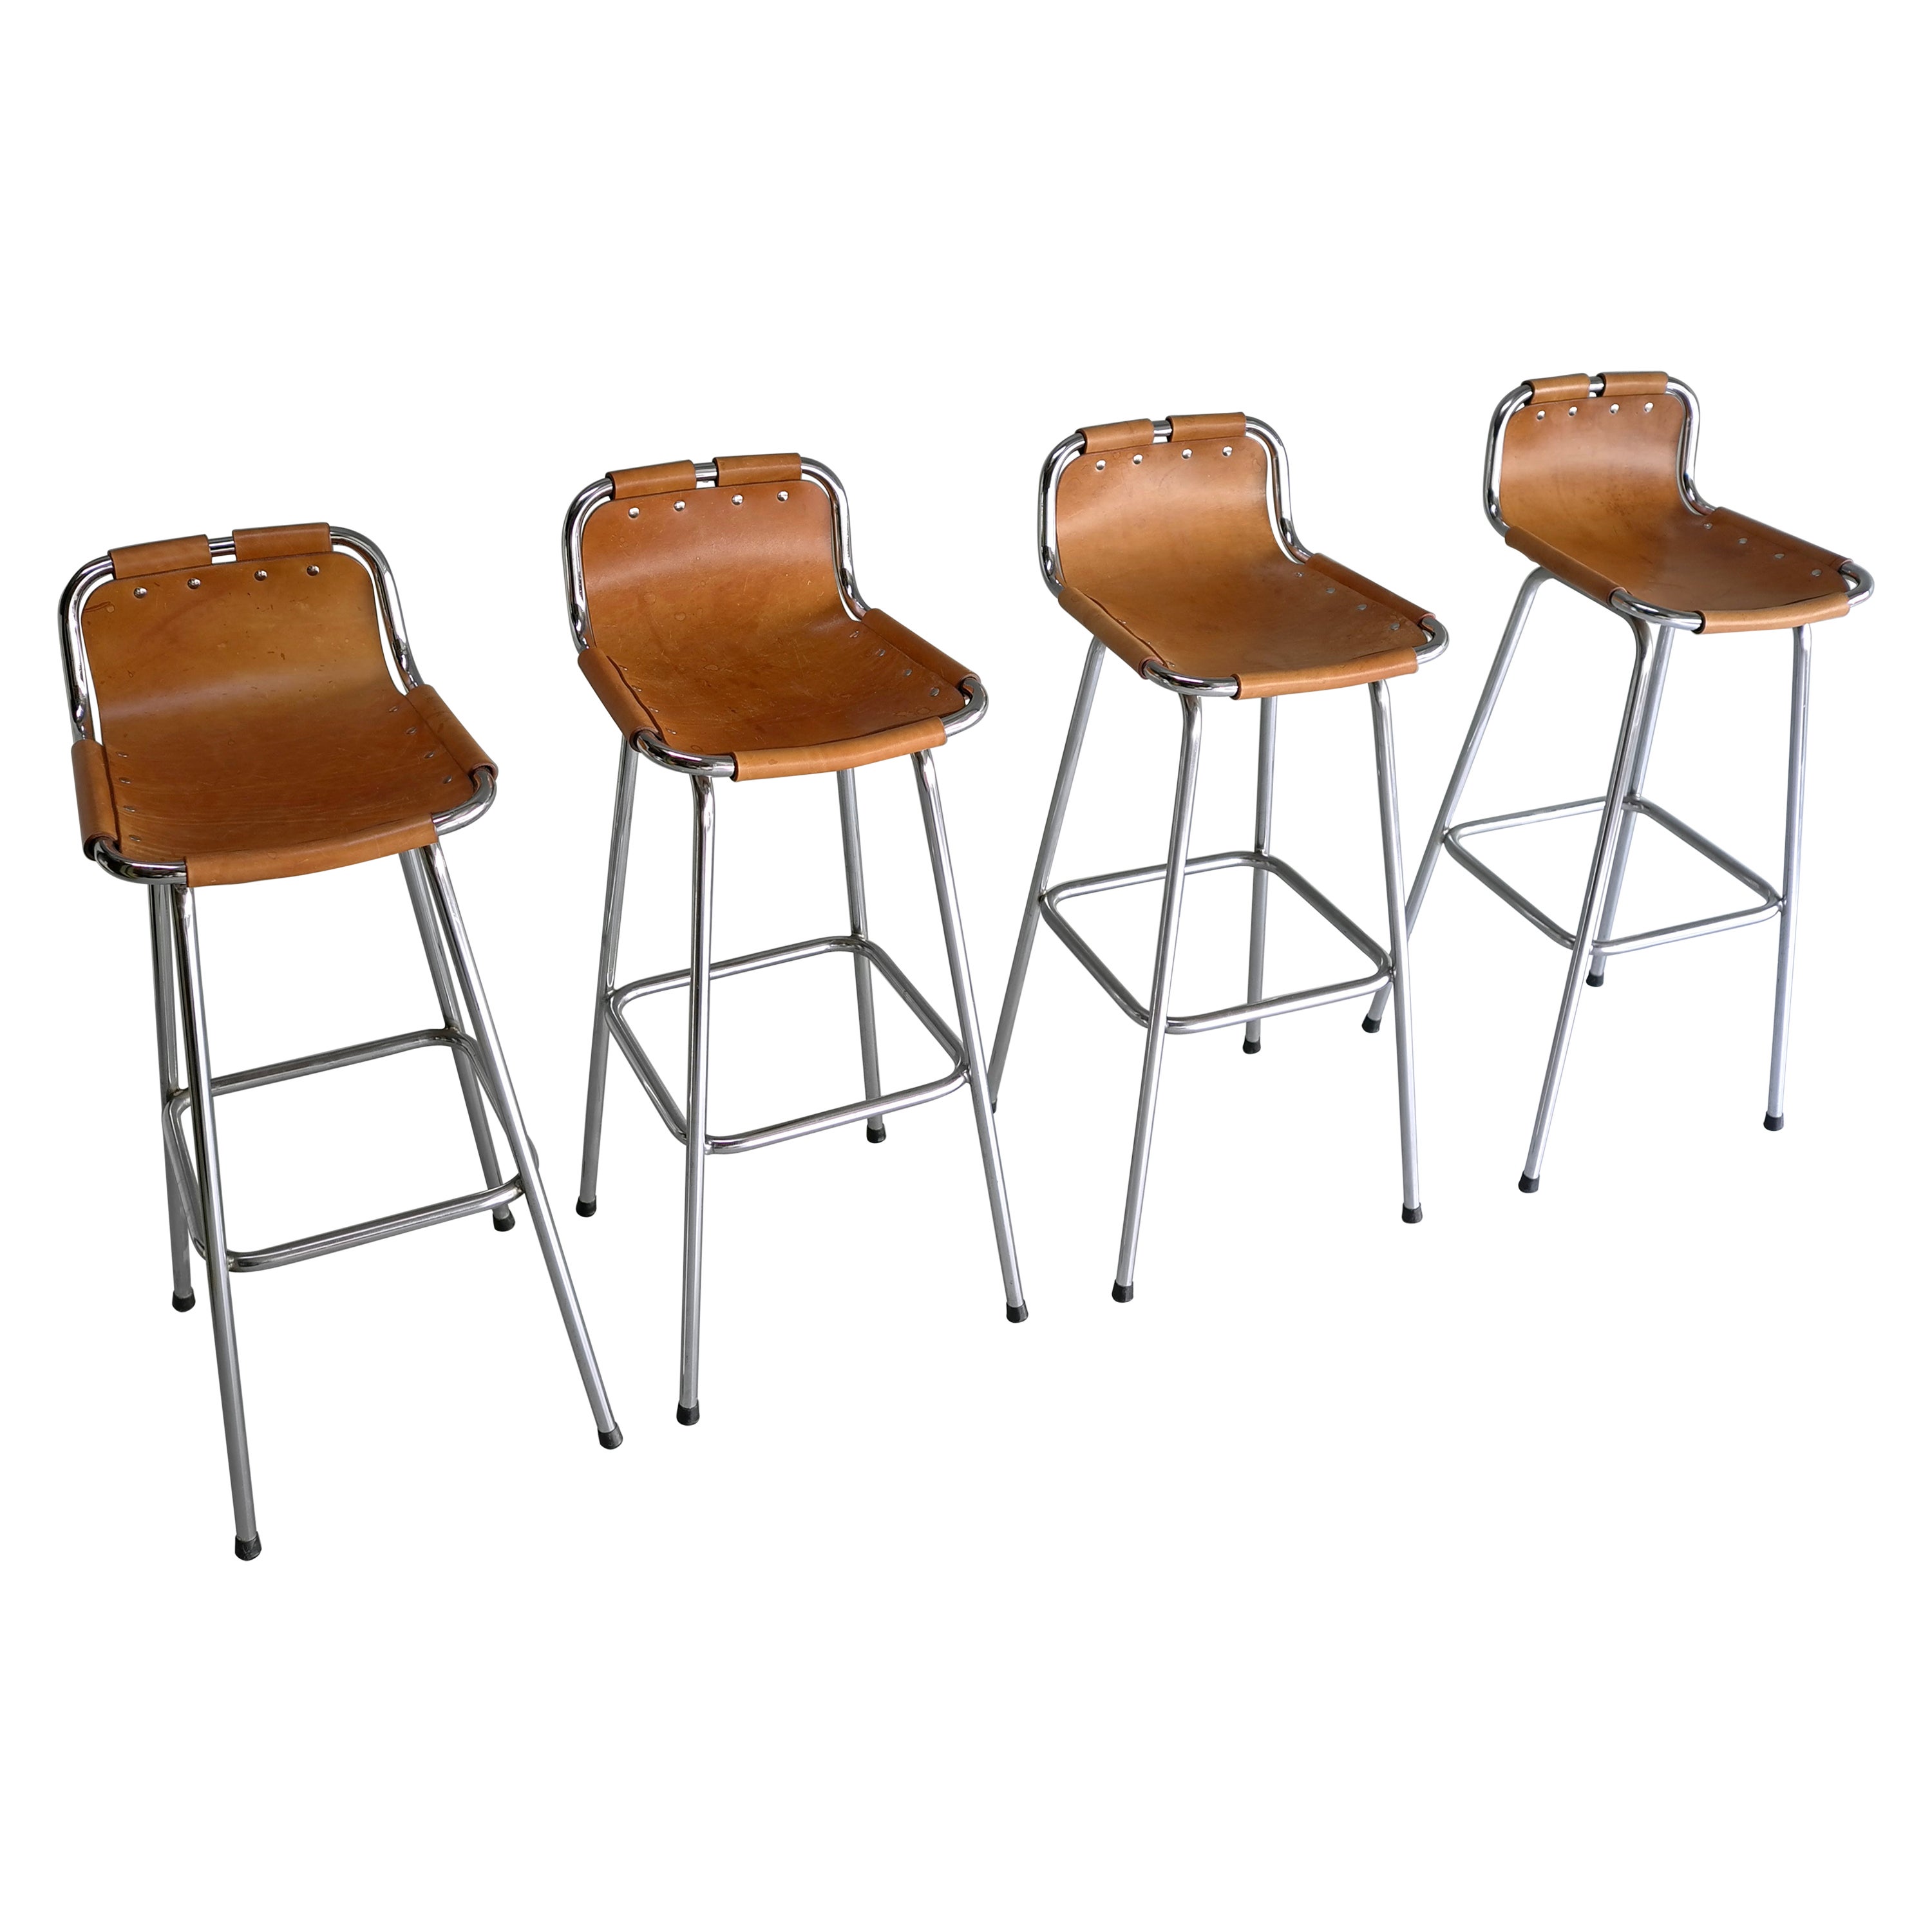 Leather Barstools Selected by Charlotte Perriand for Les Arc Ski Resort France